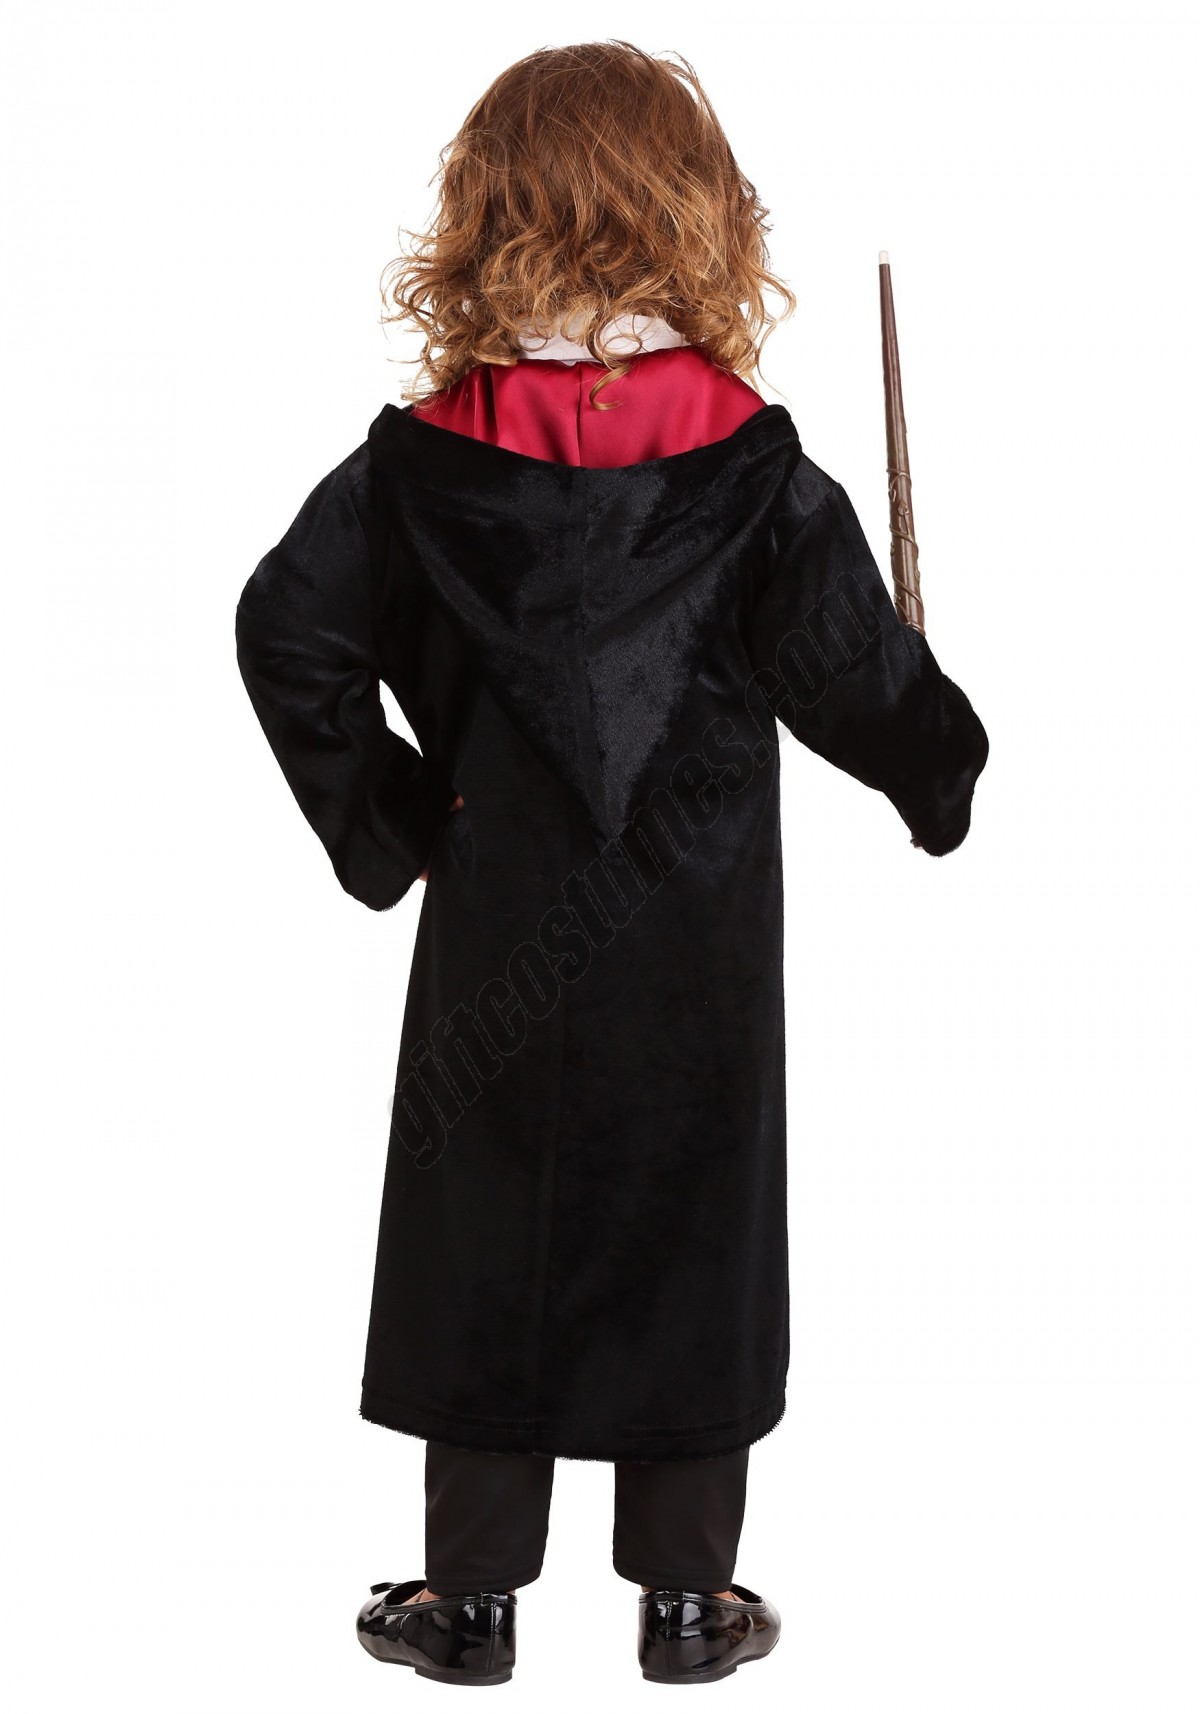 Harry Potter Toddler's Deluxe Gryffindor Robe Costume Promotions - -2